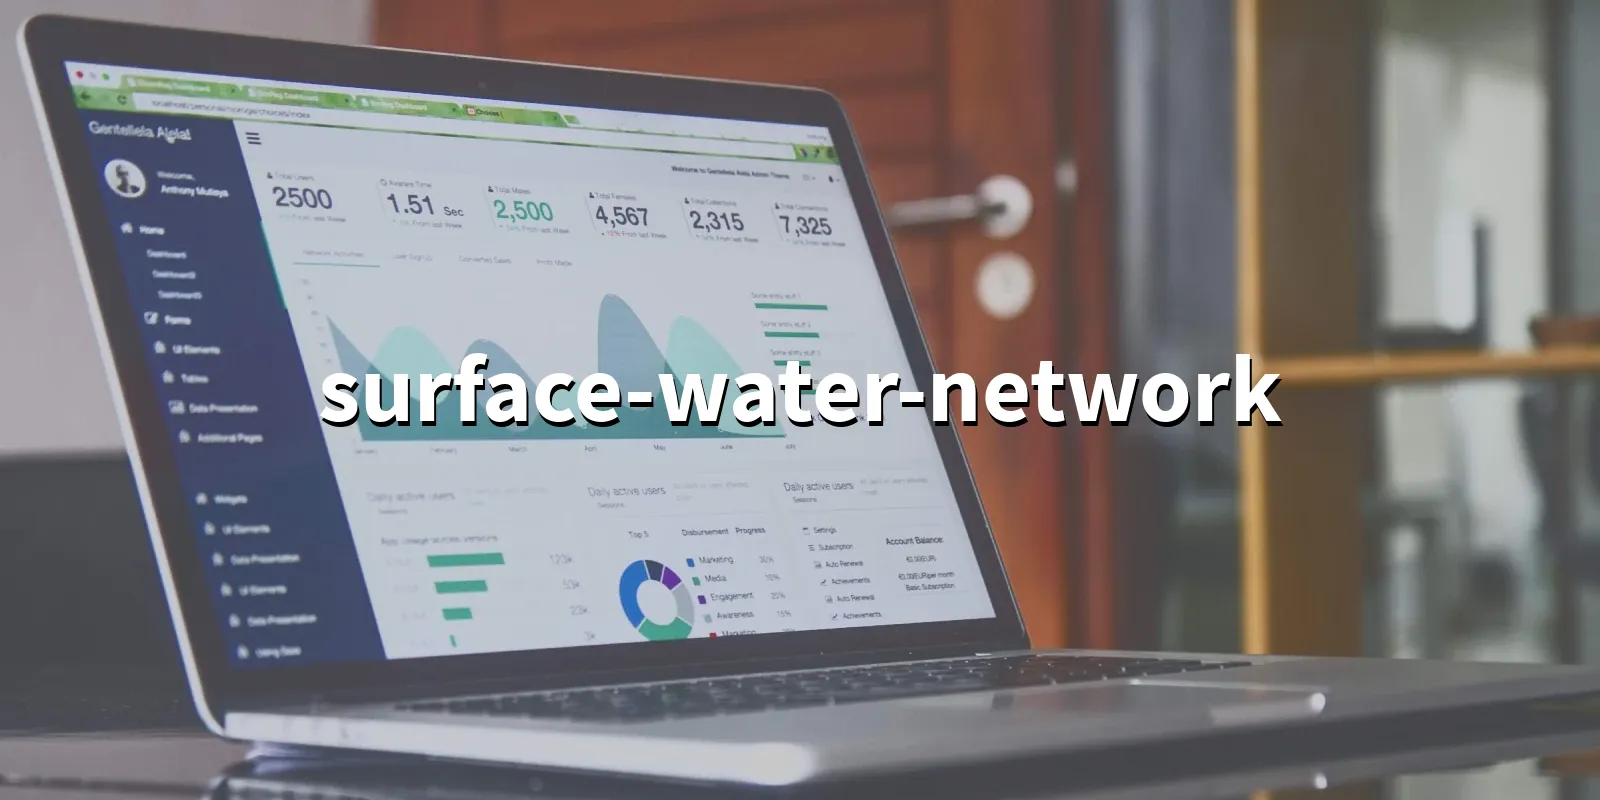 /pkg/s/surface-water-network/surface-water-network-banner.webp